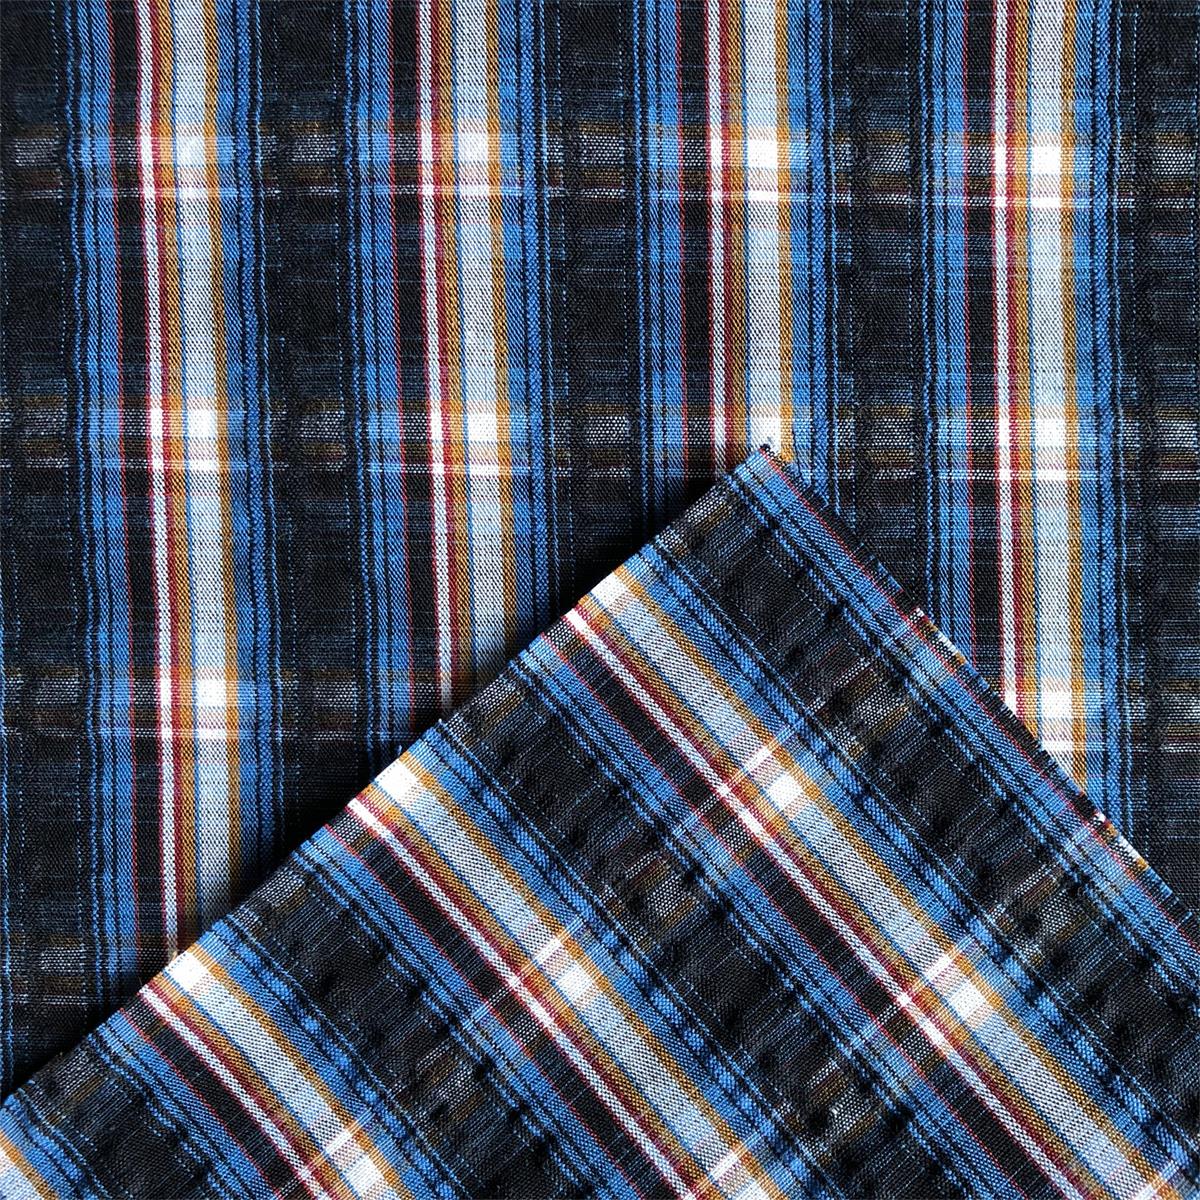 Yarn Dyed Fabric by compact yarn 100% cotton yarn dyed seersucker crepe plain plaid shirts woven fabric for men's casual shirts